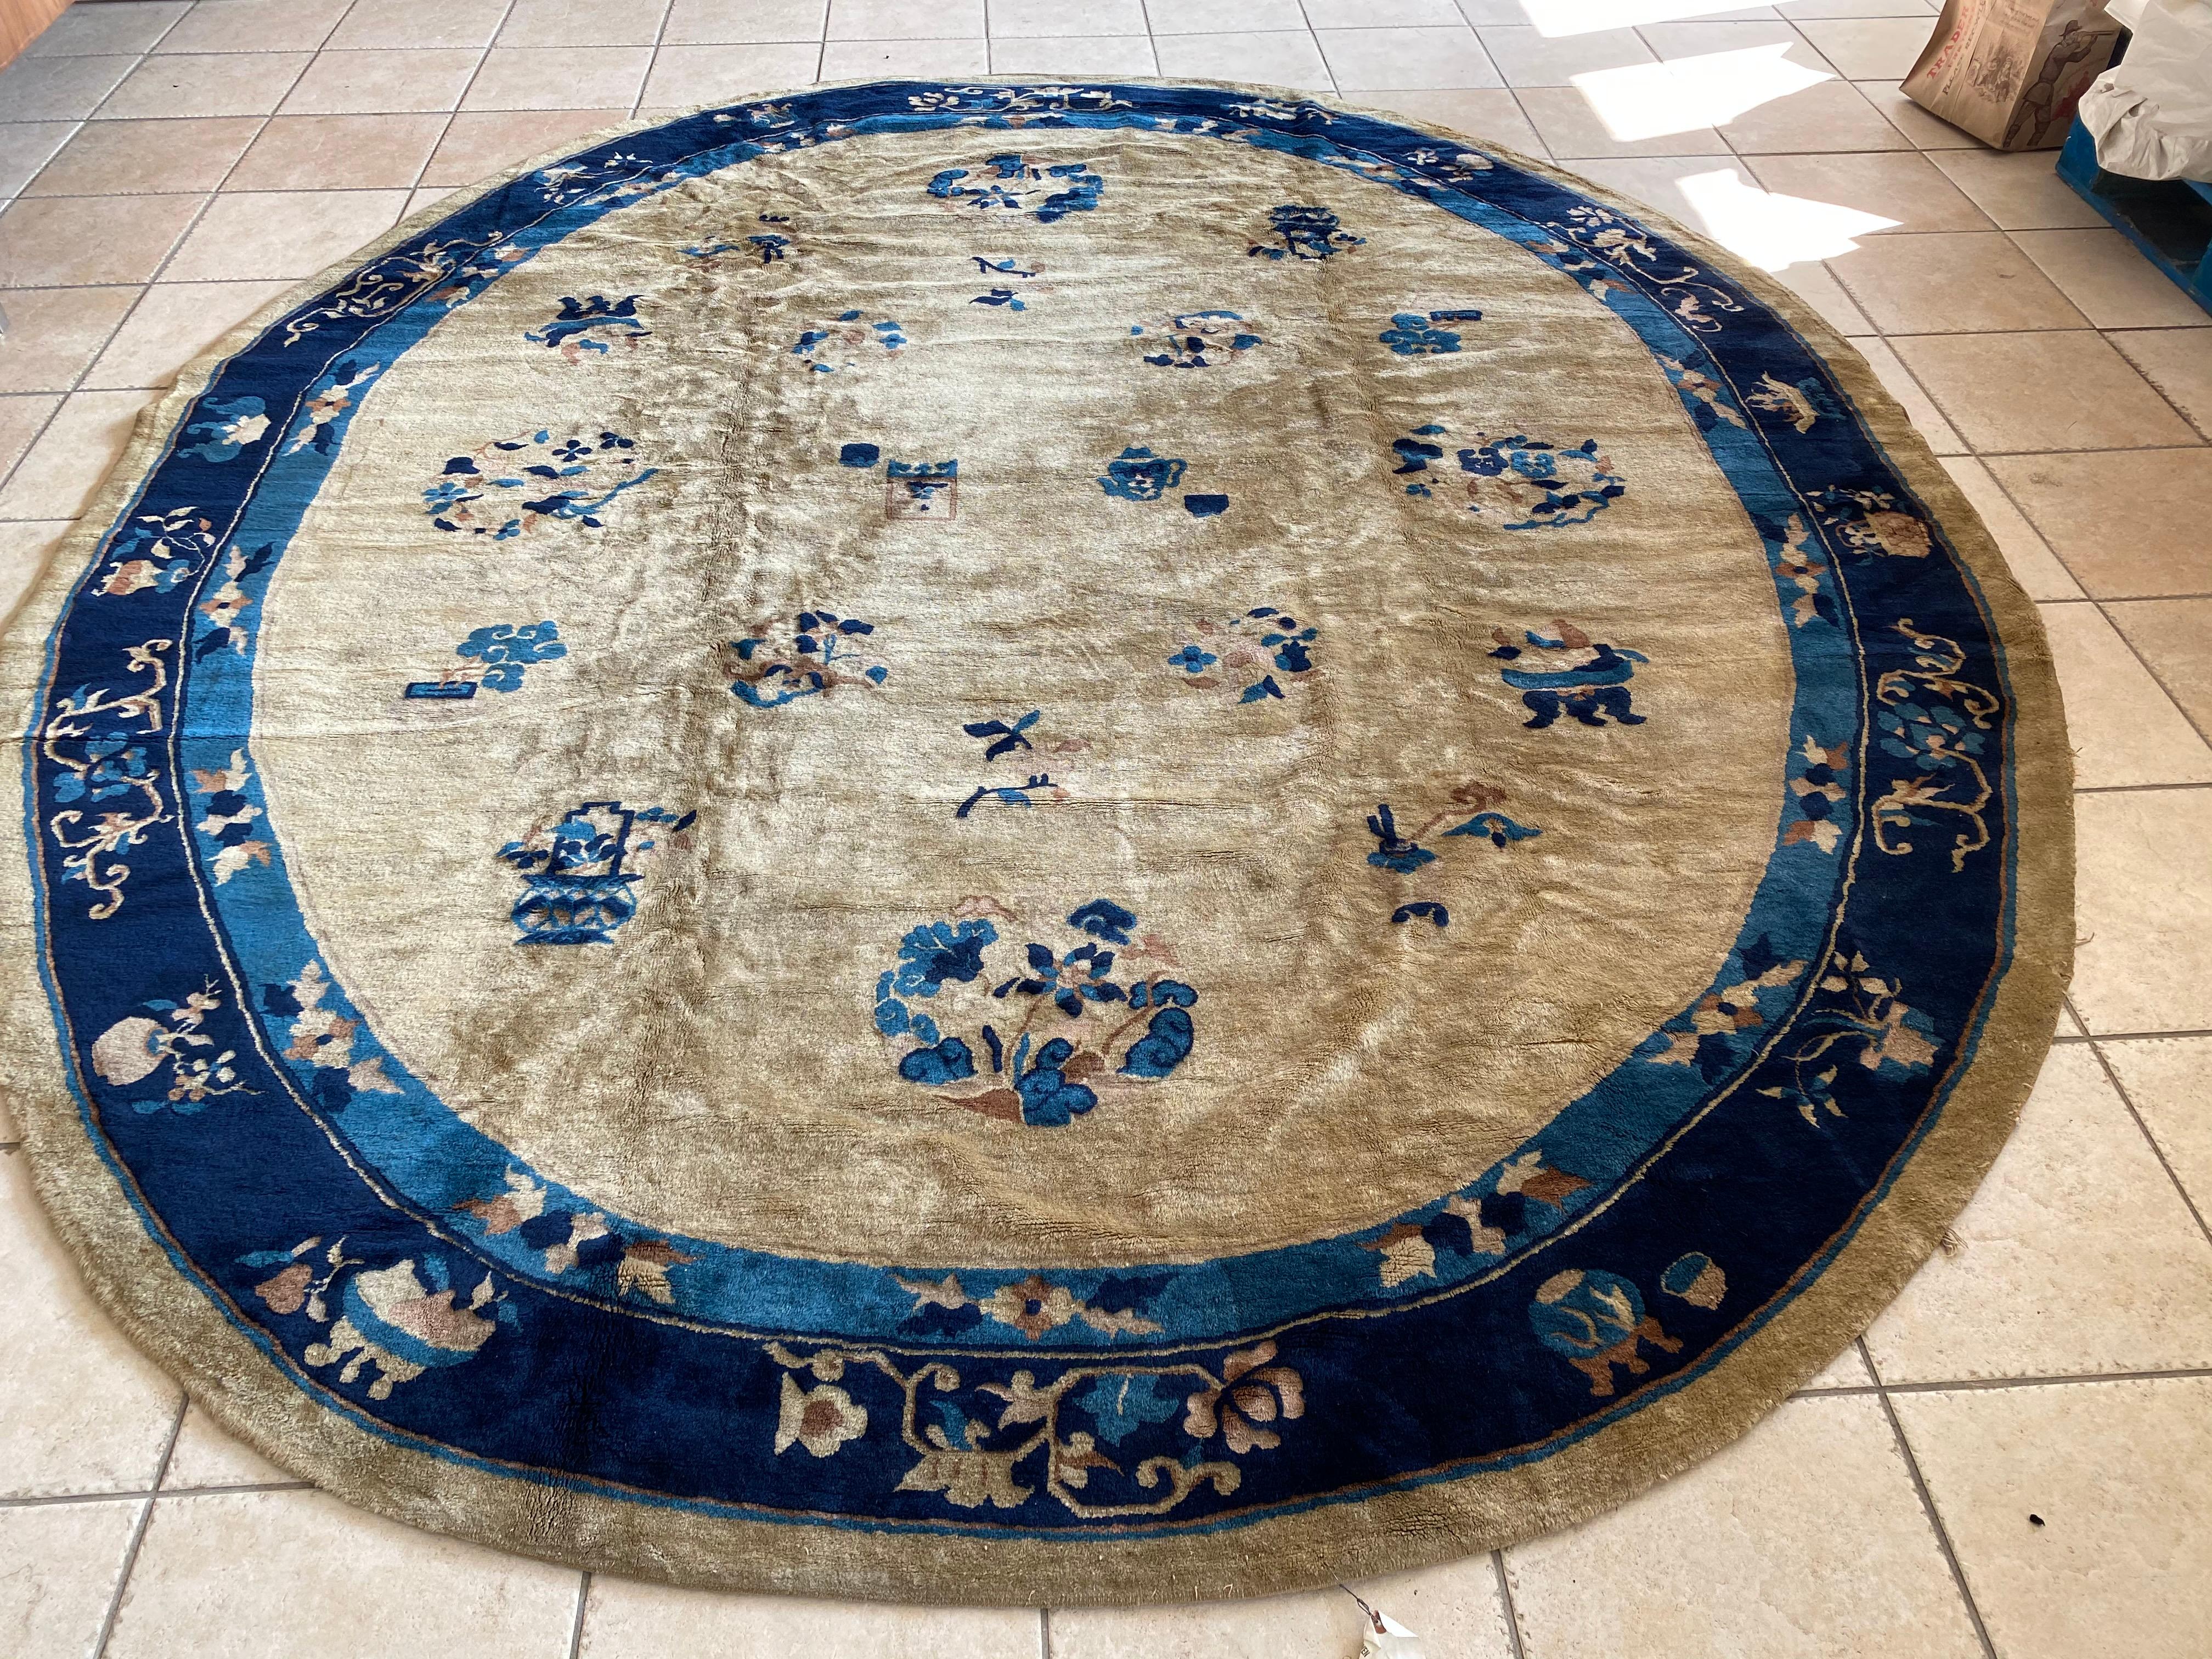 This is a lovely Late 19th Century Antique Gold Oval Peking Chinese Area Rug c. 1880-1900 measuring 9.7 x 8.1 ft.